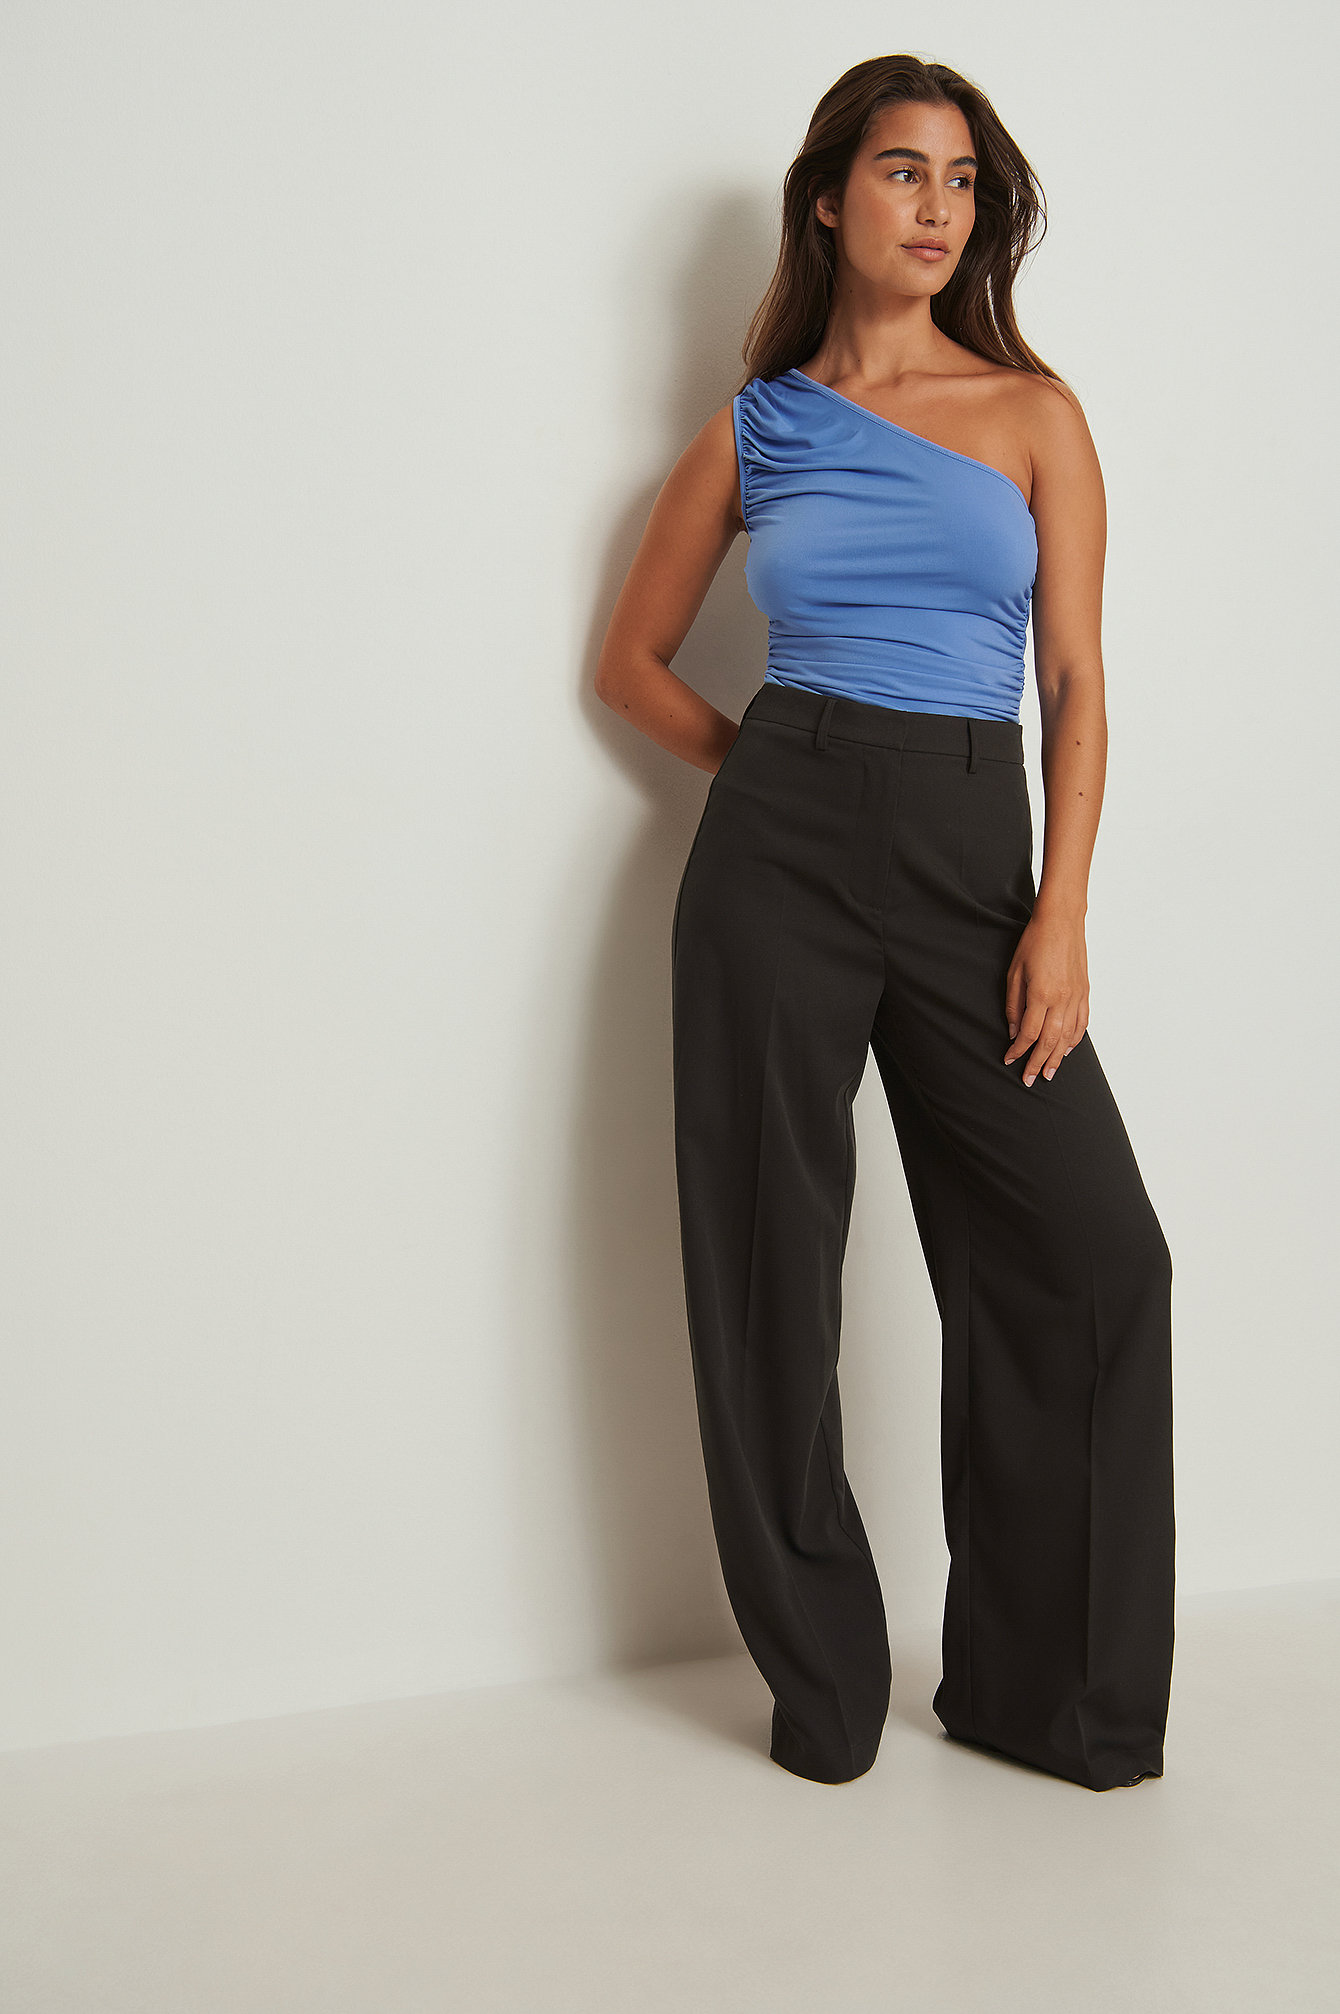 Draped Detail One Shoulder Top Outfit